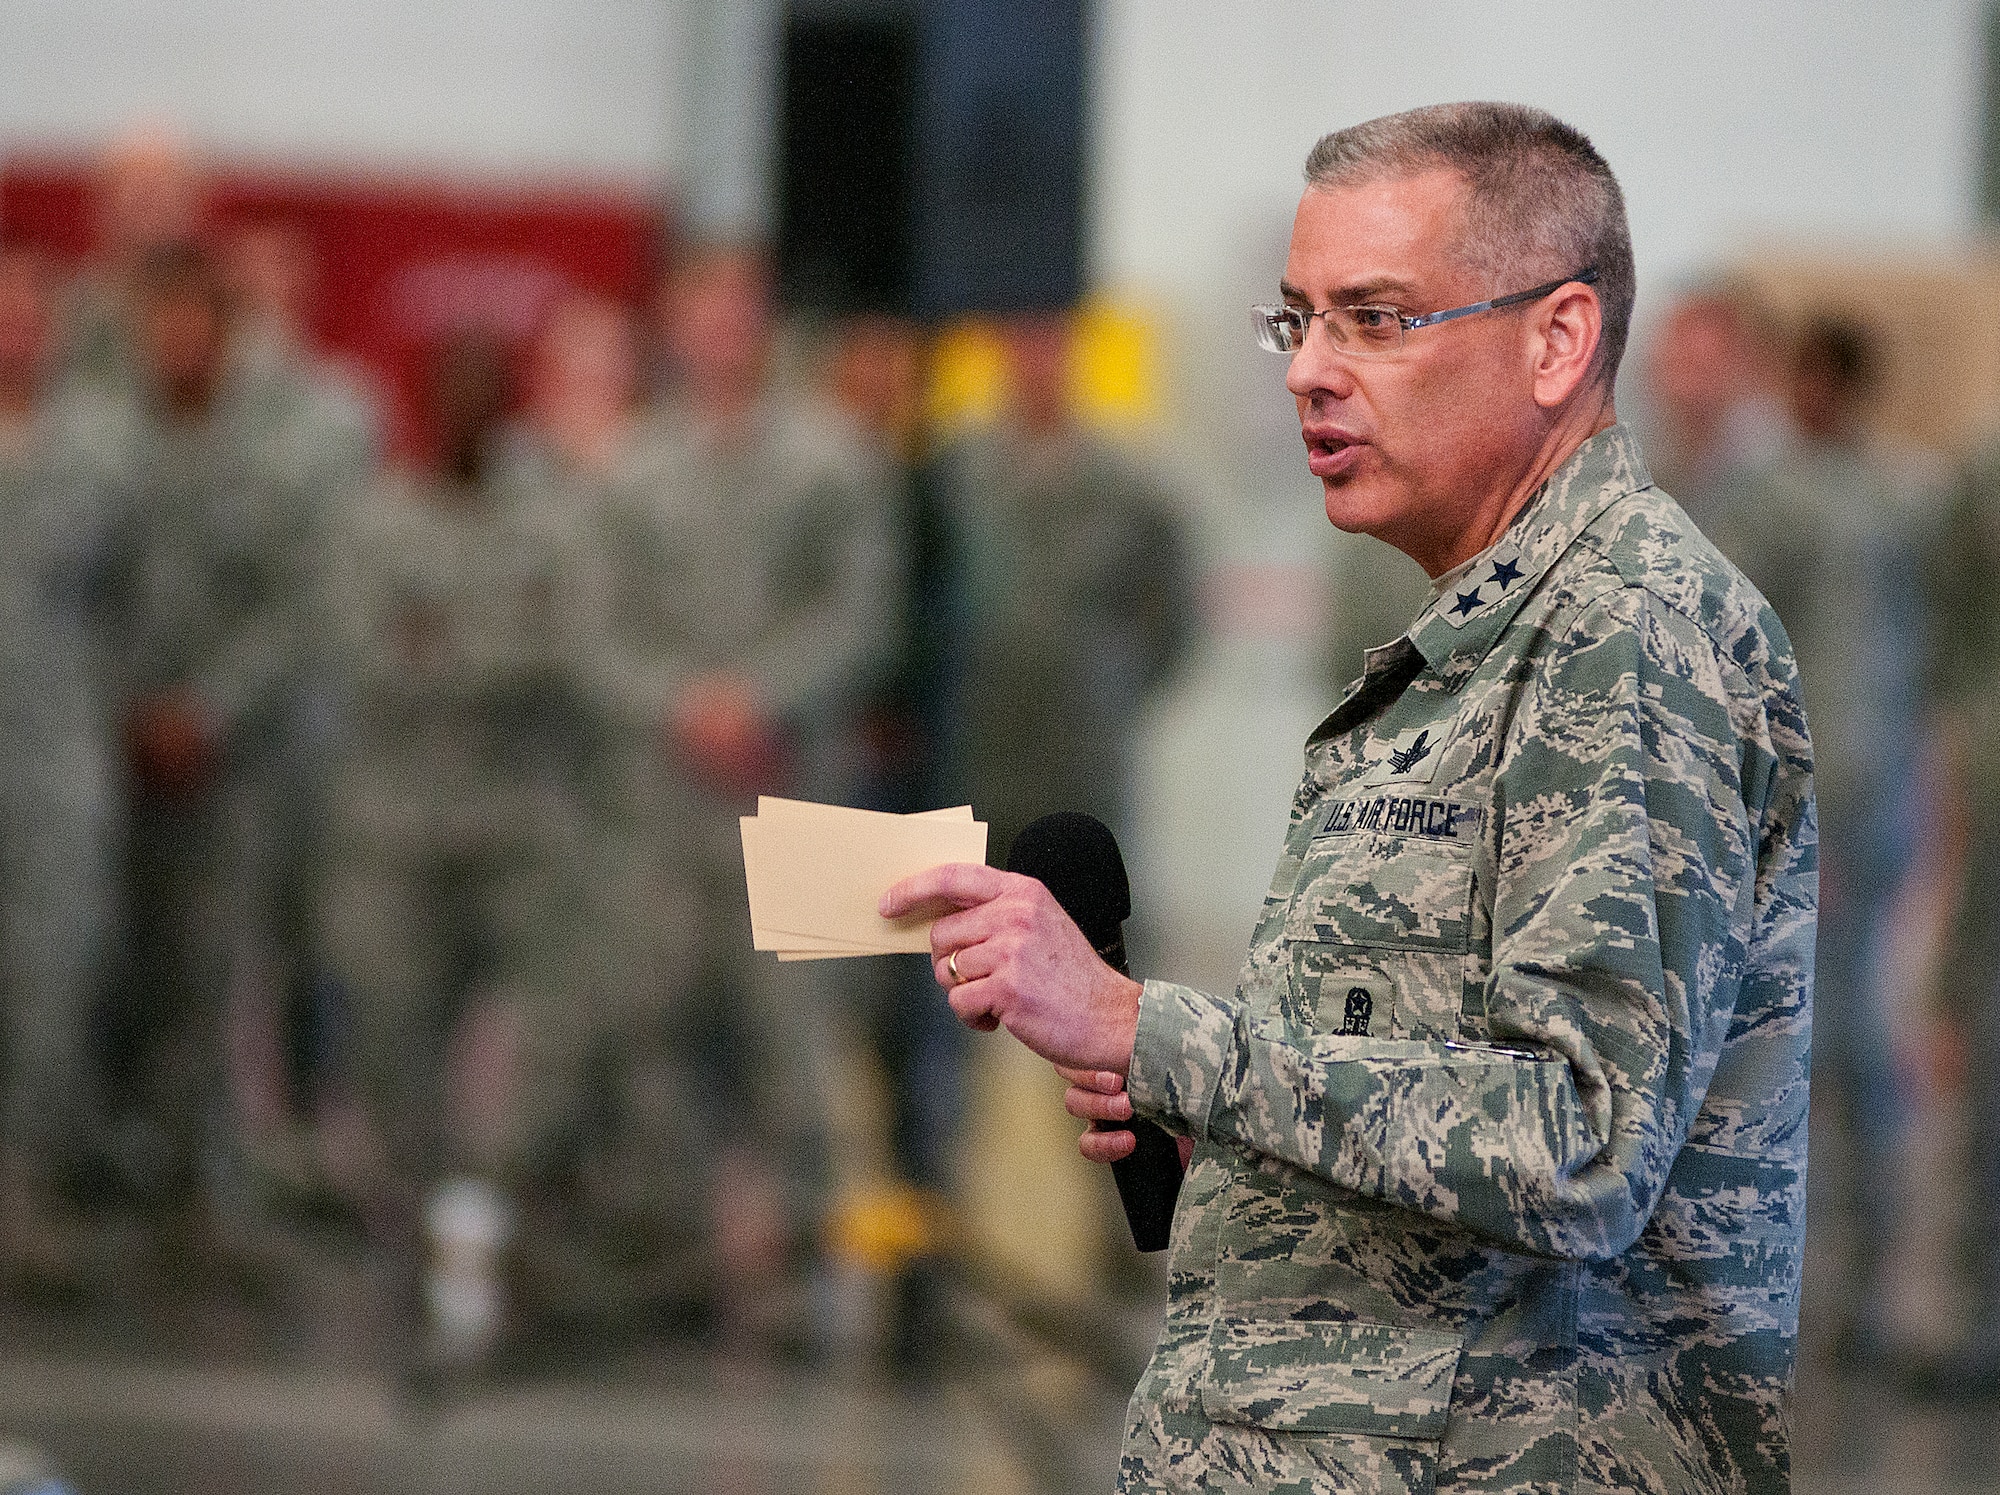 "What's great about this mission is that 99.9 percent of the time, we do our
mission flawlessly, we do it perfectly - we do it every single day," Maj.
Gen. Jack Weinstein, 20th Air Force commander, said during a base all-call Oct.
22 in the Peacekeeper High bay, Bldg. 1501, F.E. Warren Air Force Base, Wyo.
